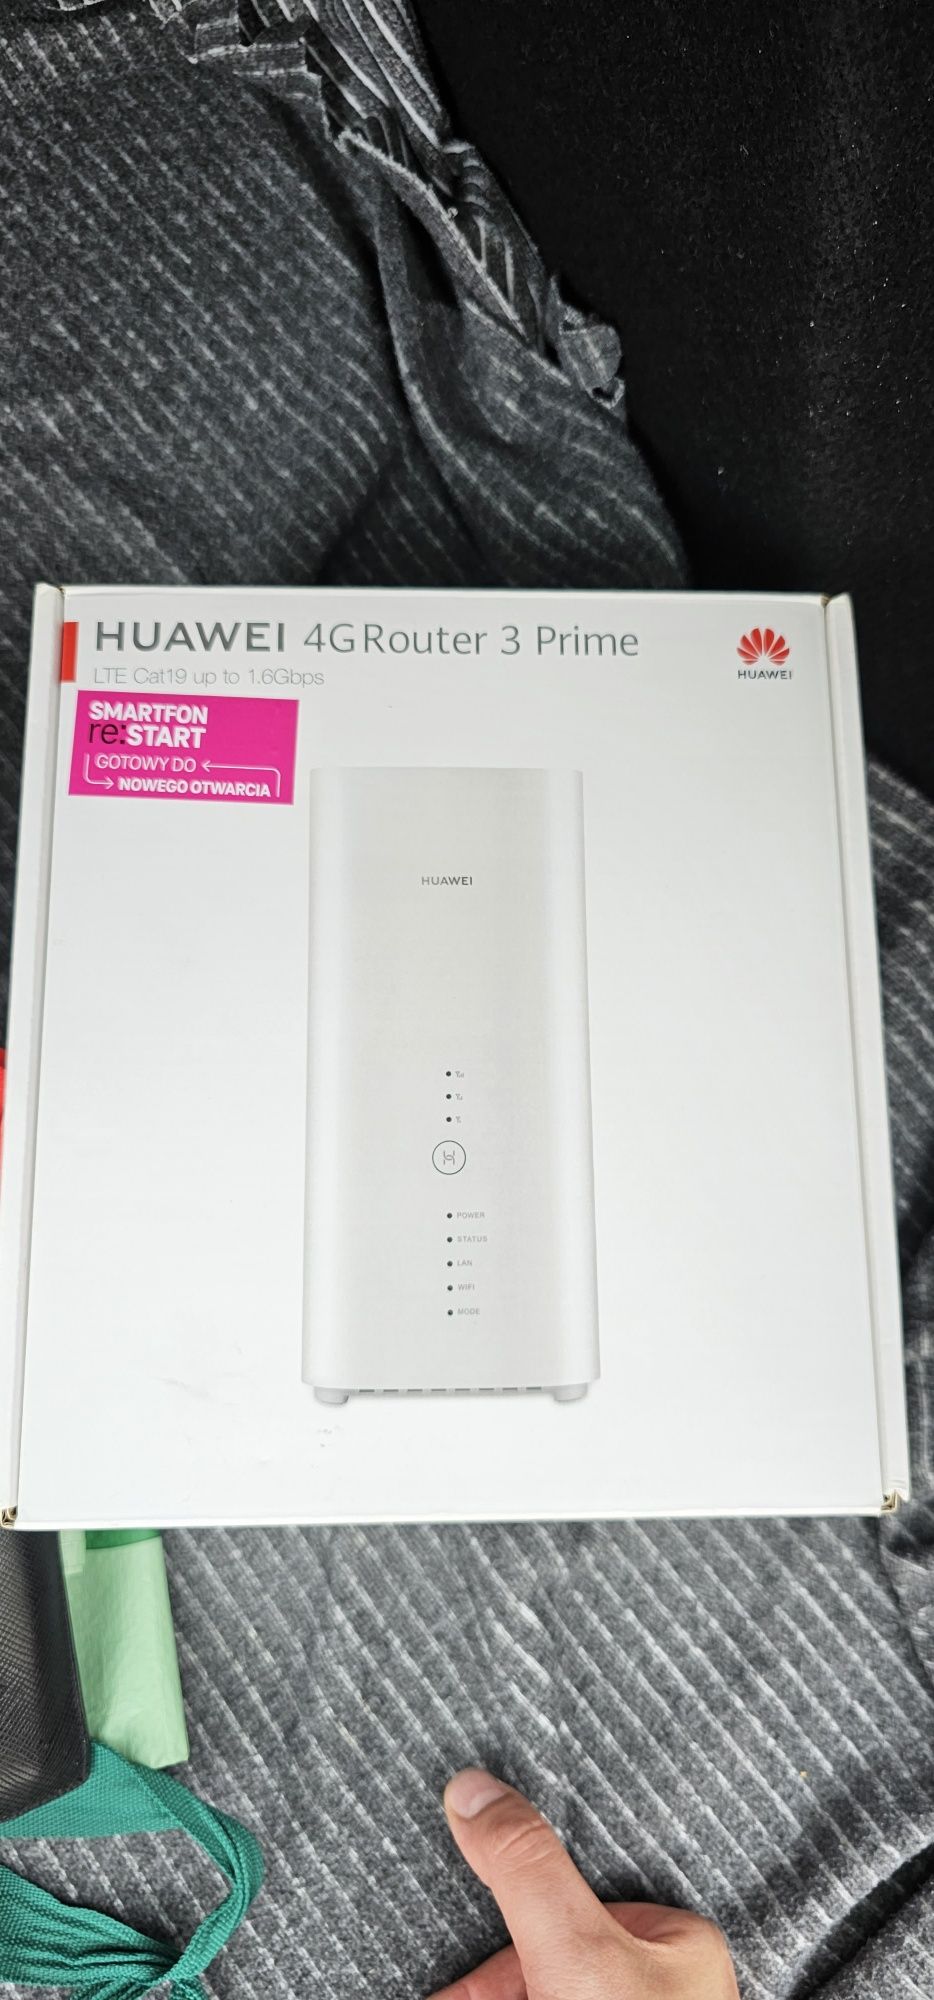 Huawei 4G Router 3 prime